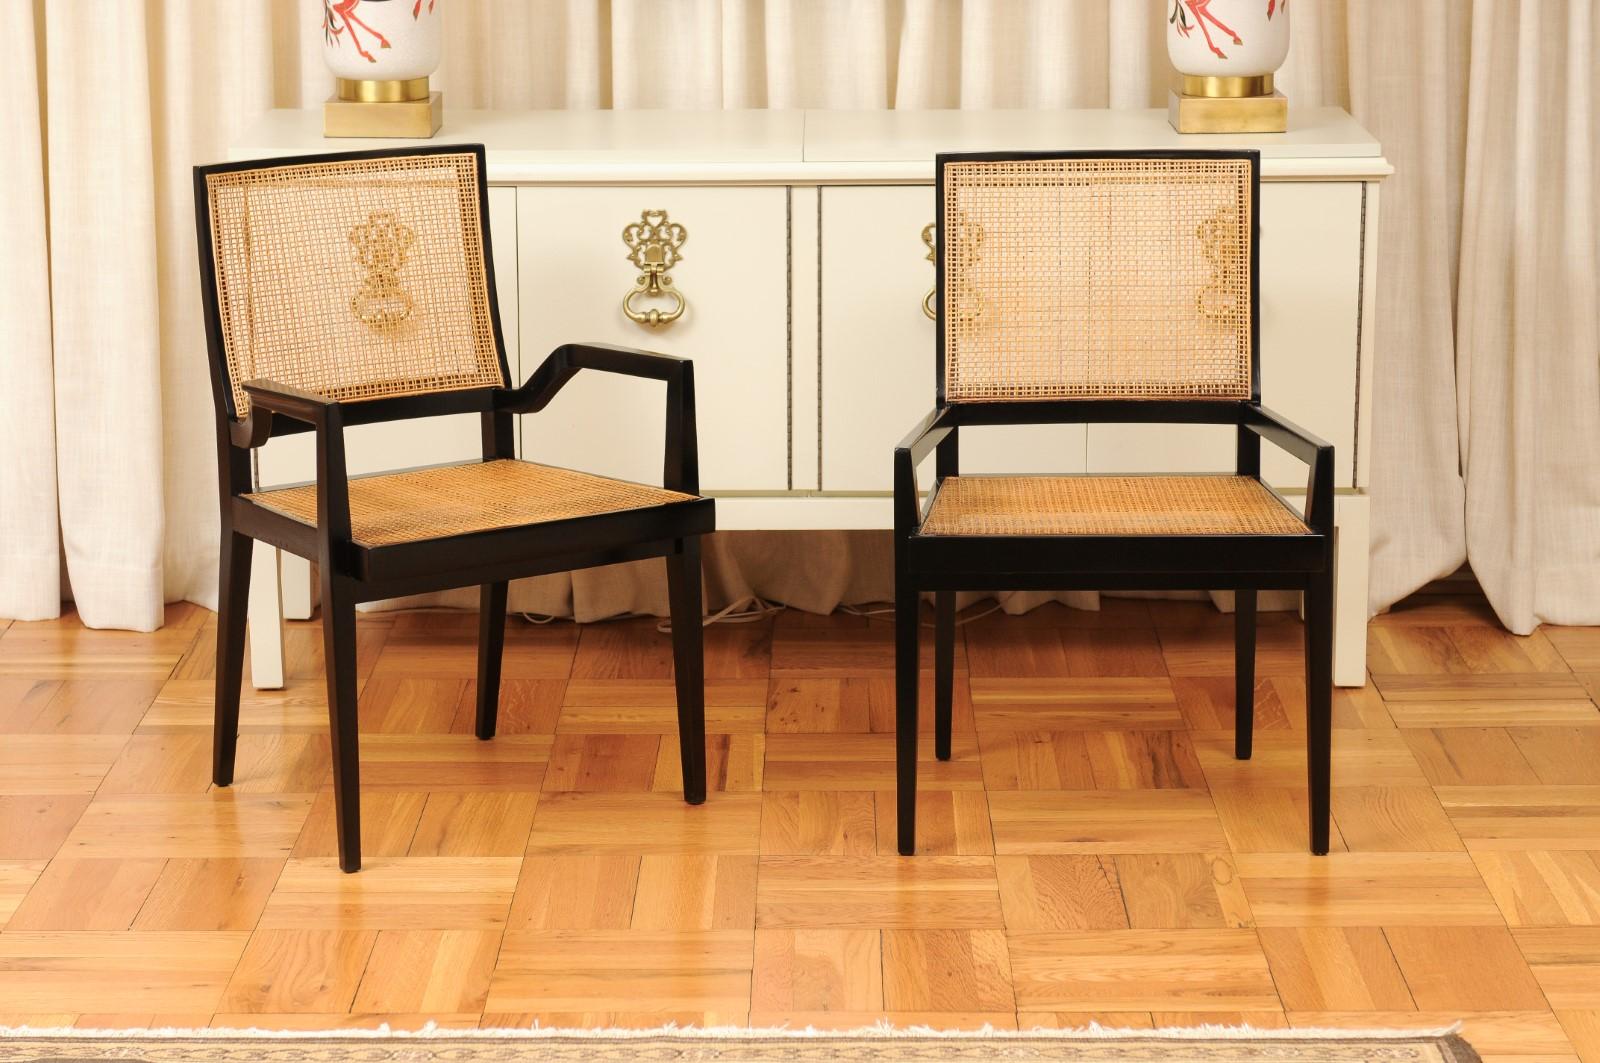 This large restored set of impossible to find seating examples is unique on the World market. These magnificent dining chairs are shipped as professionally photographed and described in the listing narrative: meticulously professionally restored and